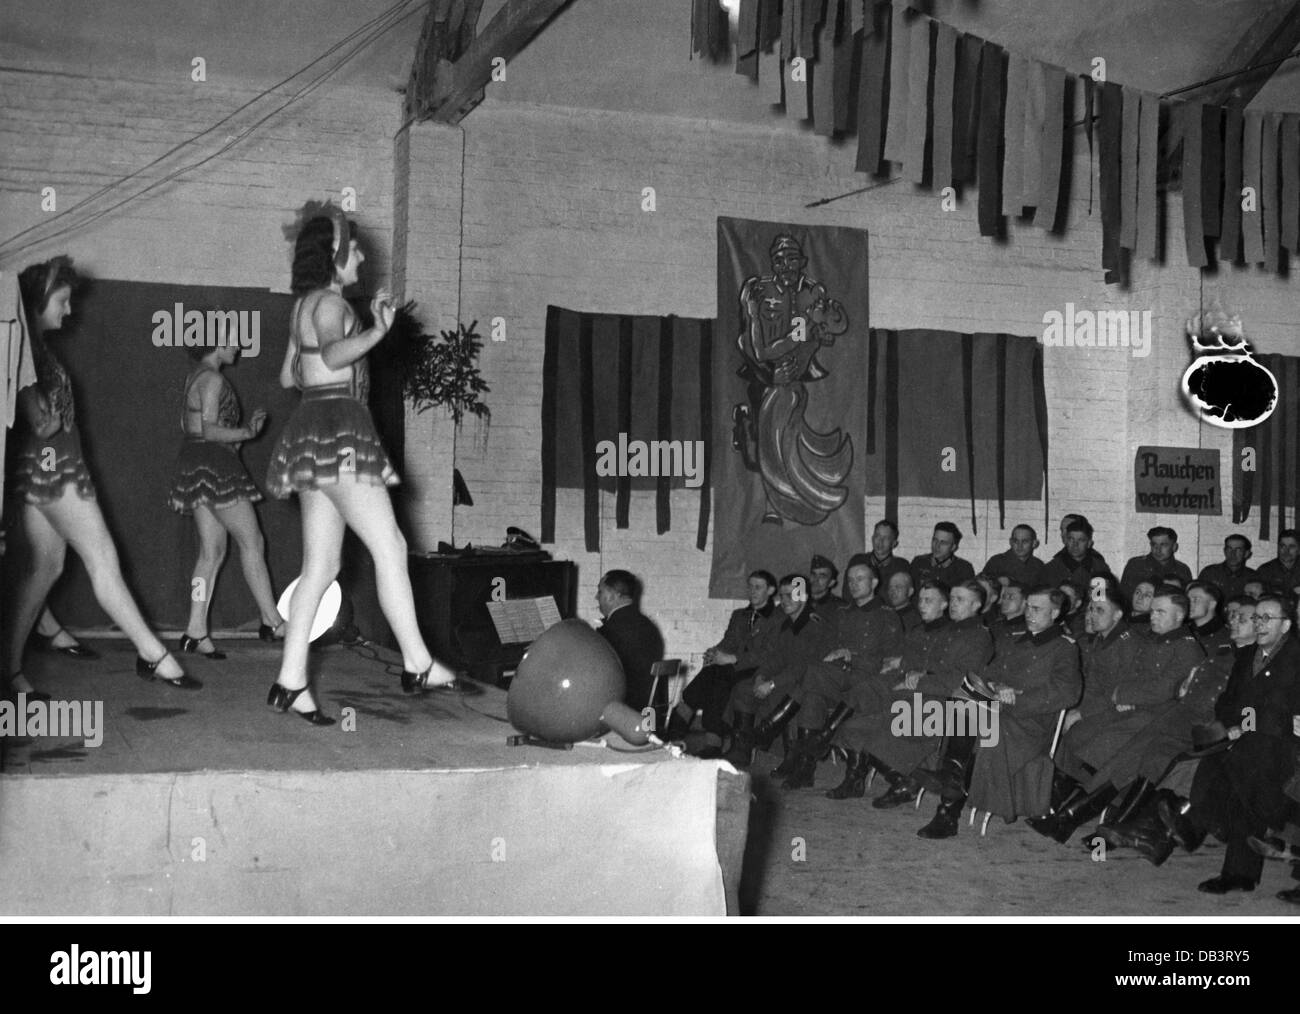 National Socialism, organisations, 'Strength Through Joy' ('Kraft durch Freude', KDF), KDF front theatre, dancers on the stage, February 1940, Additional-Rights-Clearences-Not Available Stock Photo